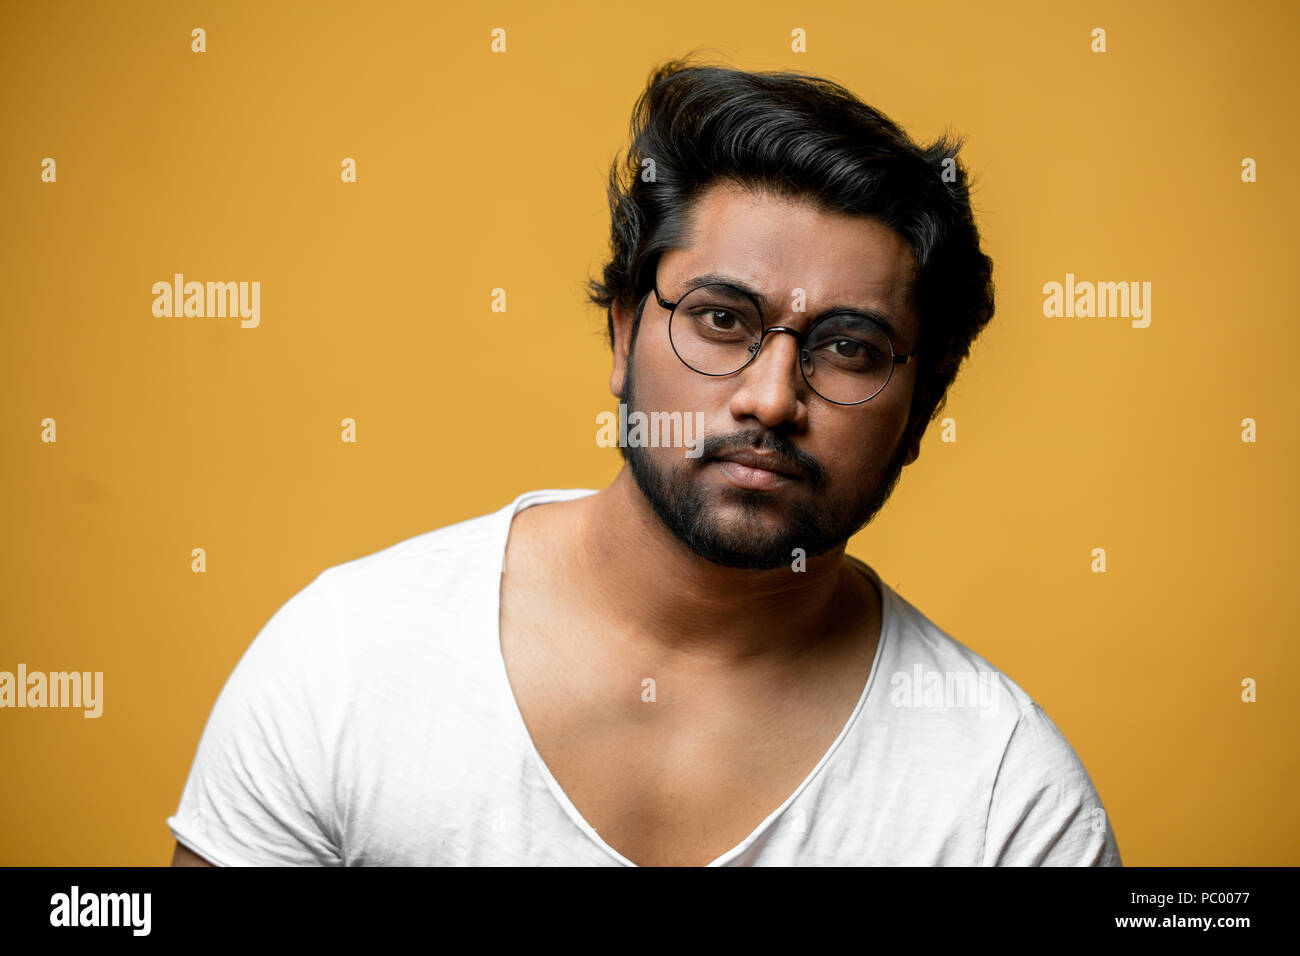 clever pleasant Indian man wearing round glasses and white t-shirt Stock  Photo - Alamy